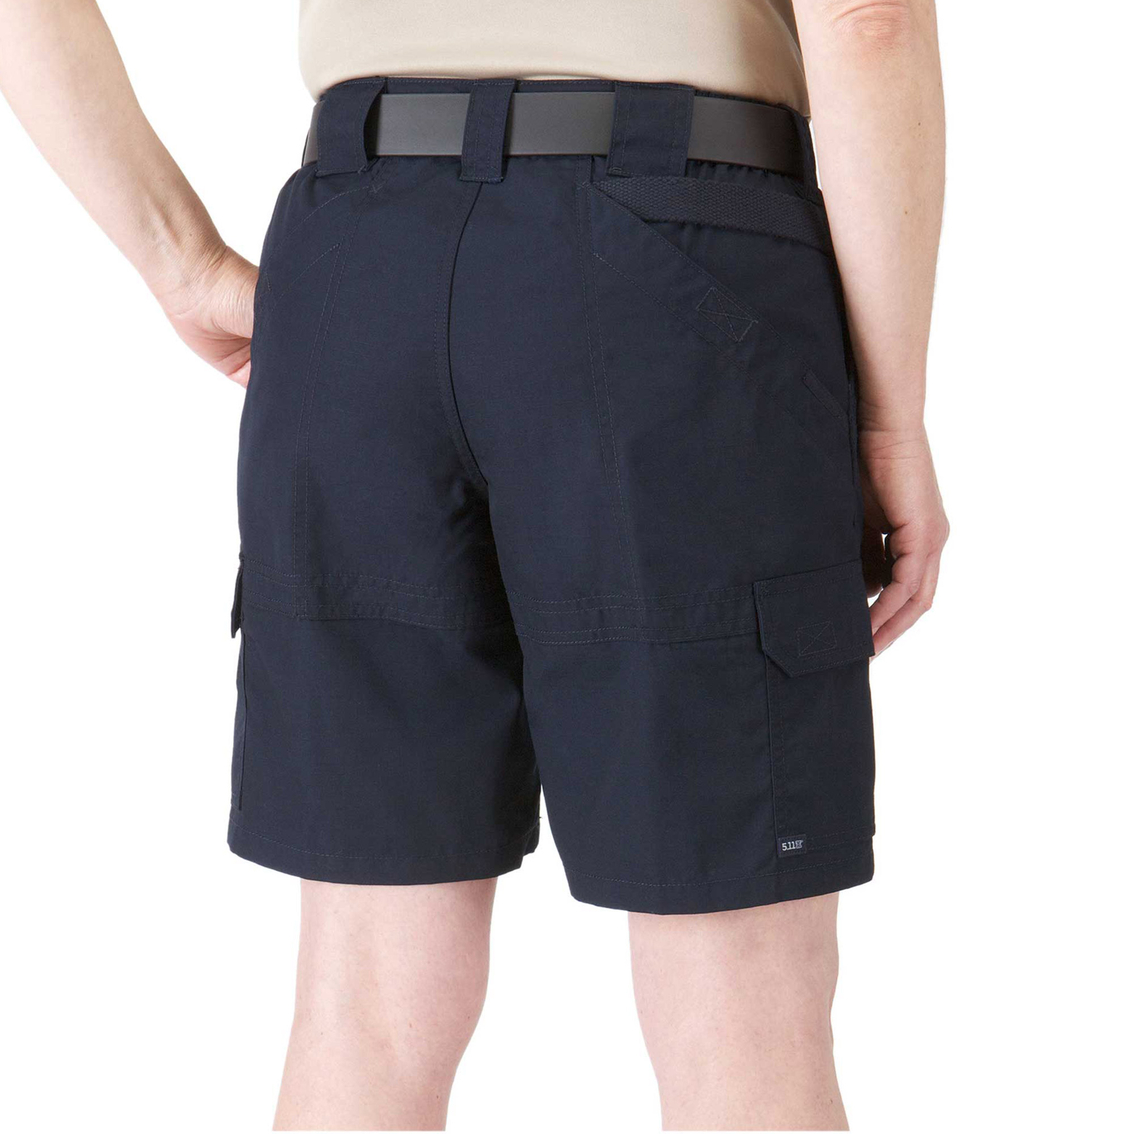 5.11 Women's Taclite Pro 9 in. Shorts - Image 2 of 3